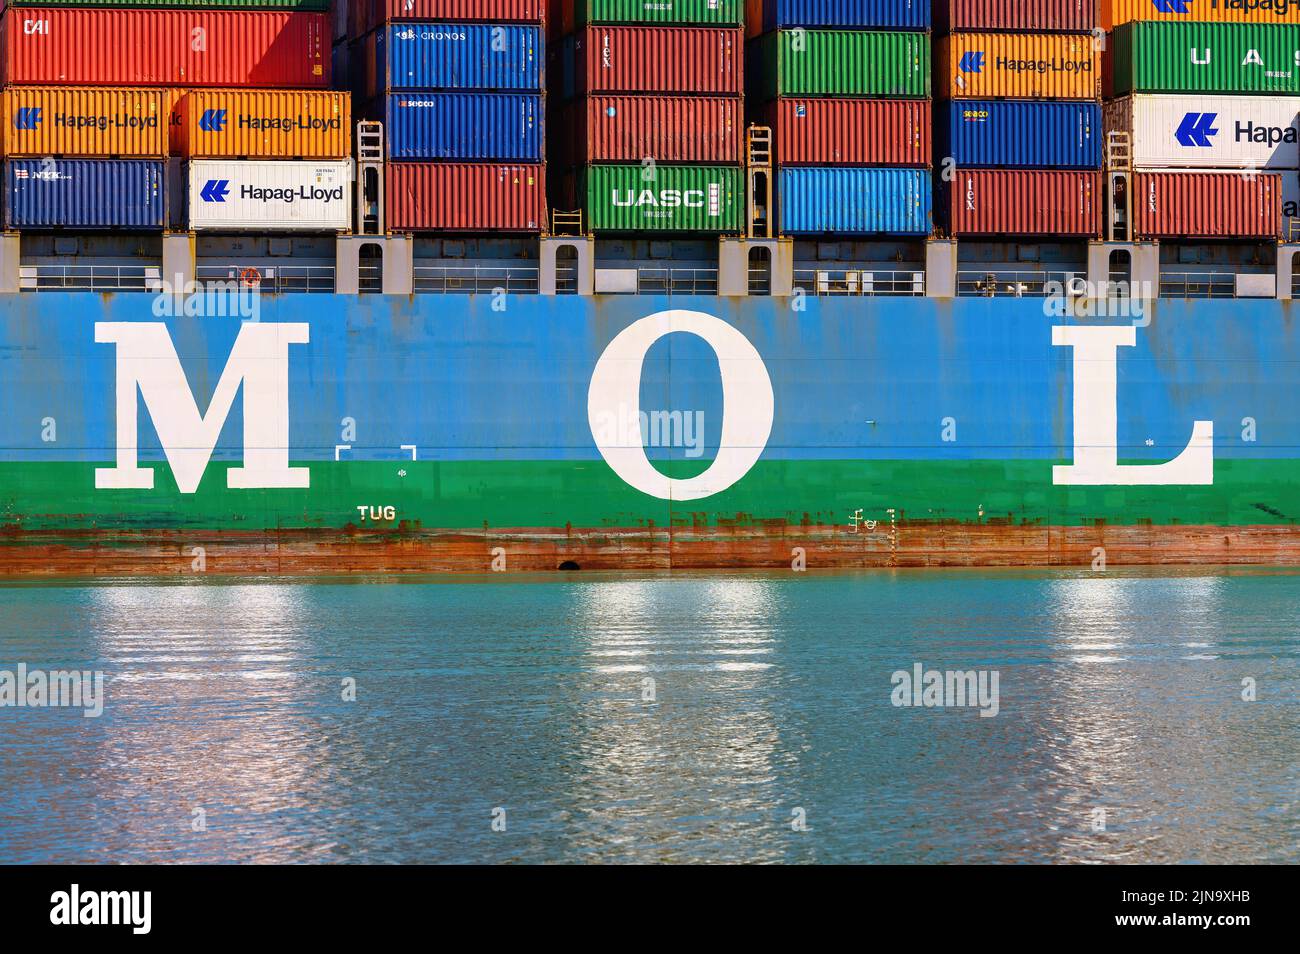 The Mitsui O.S.K Lines logo on the container carrier MOL Experience - June 2021. Stock Photo